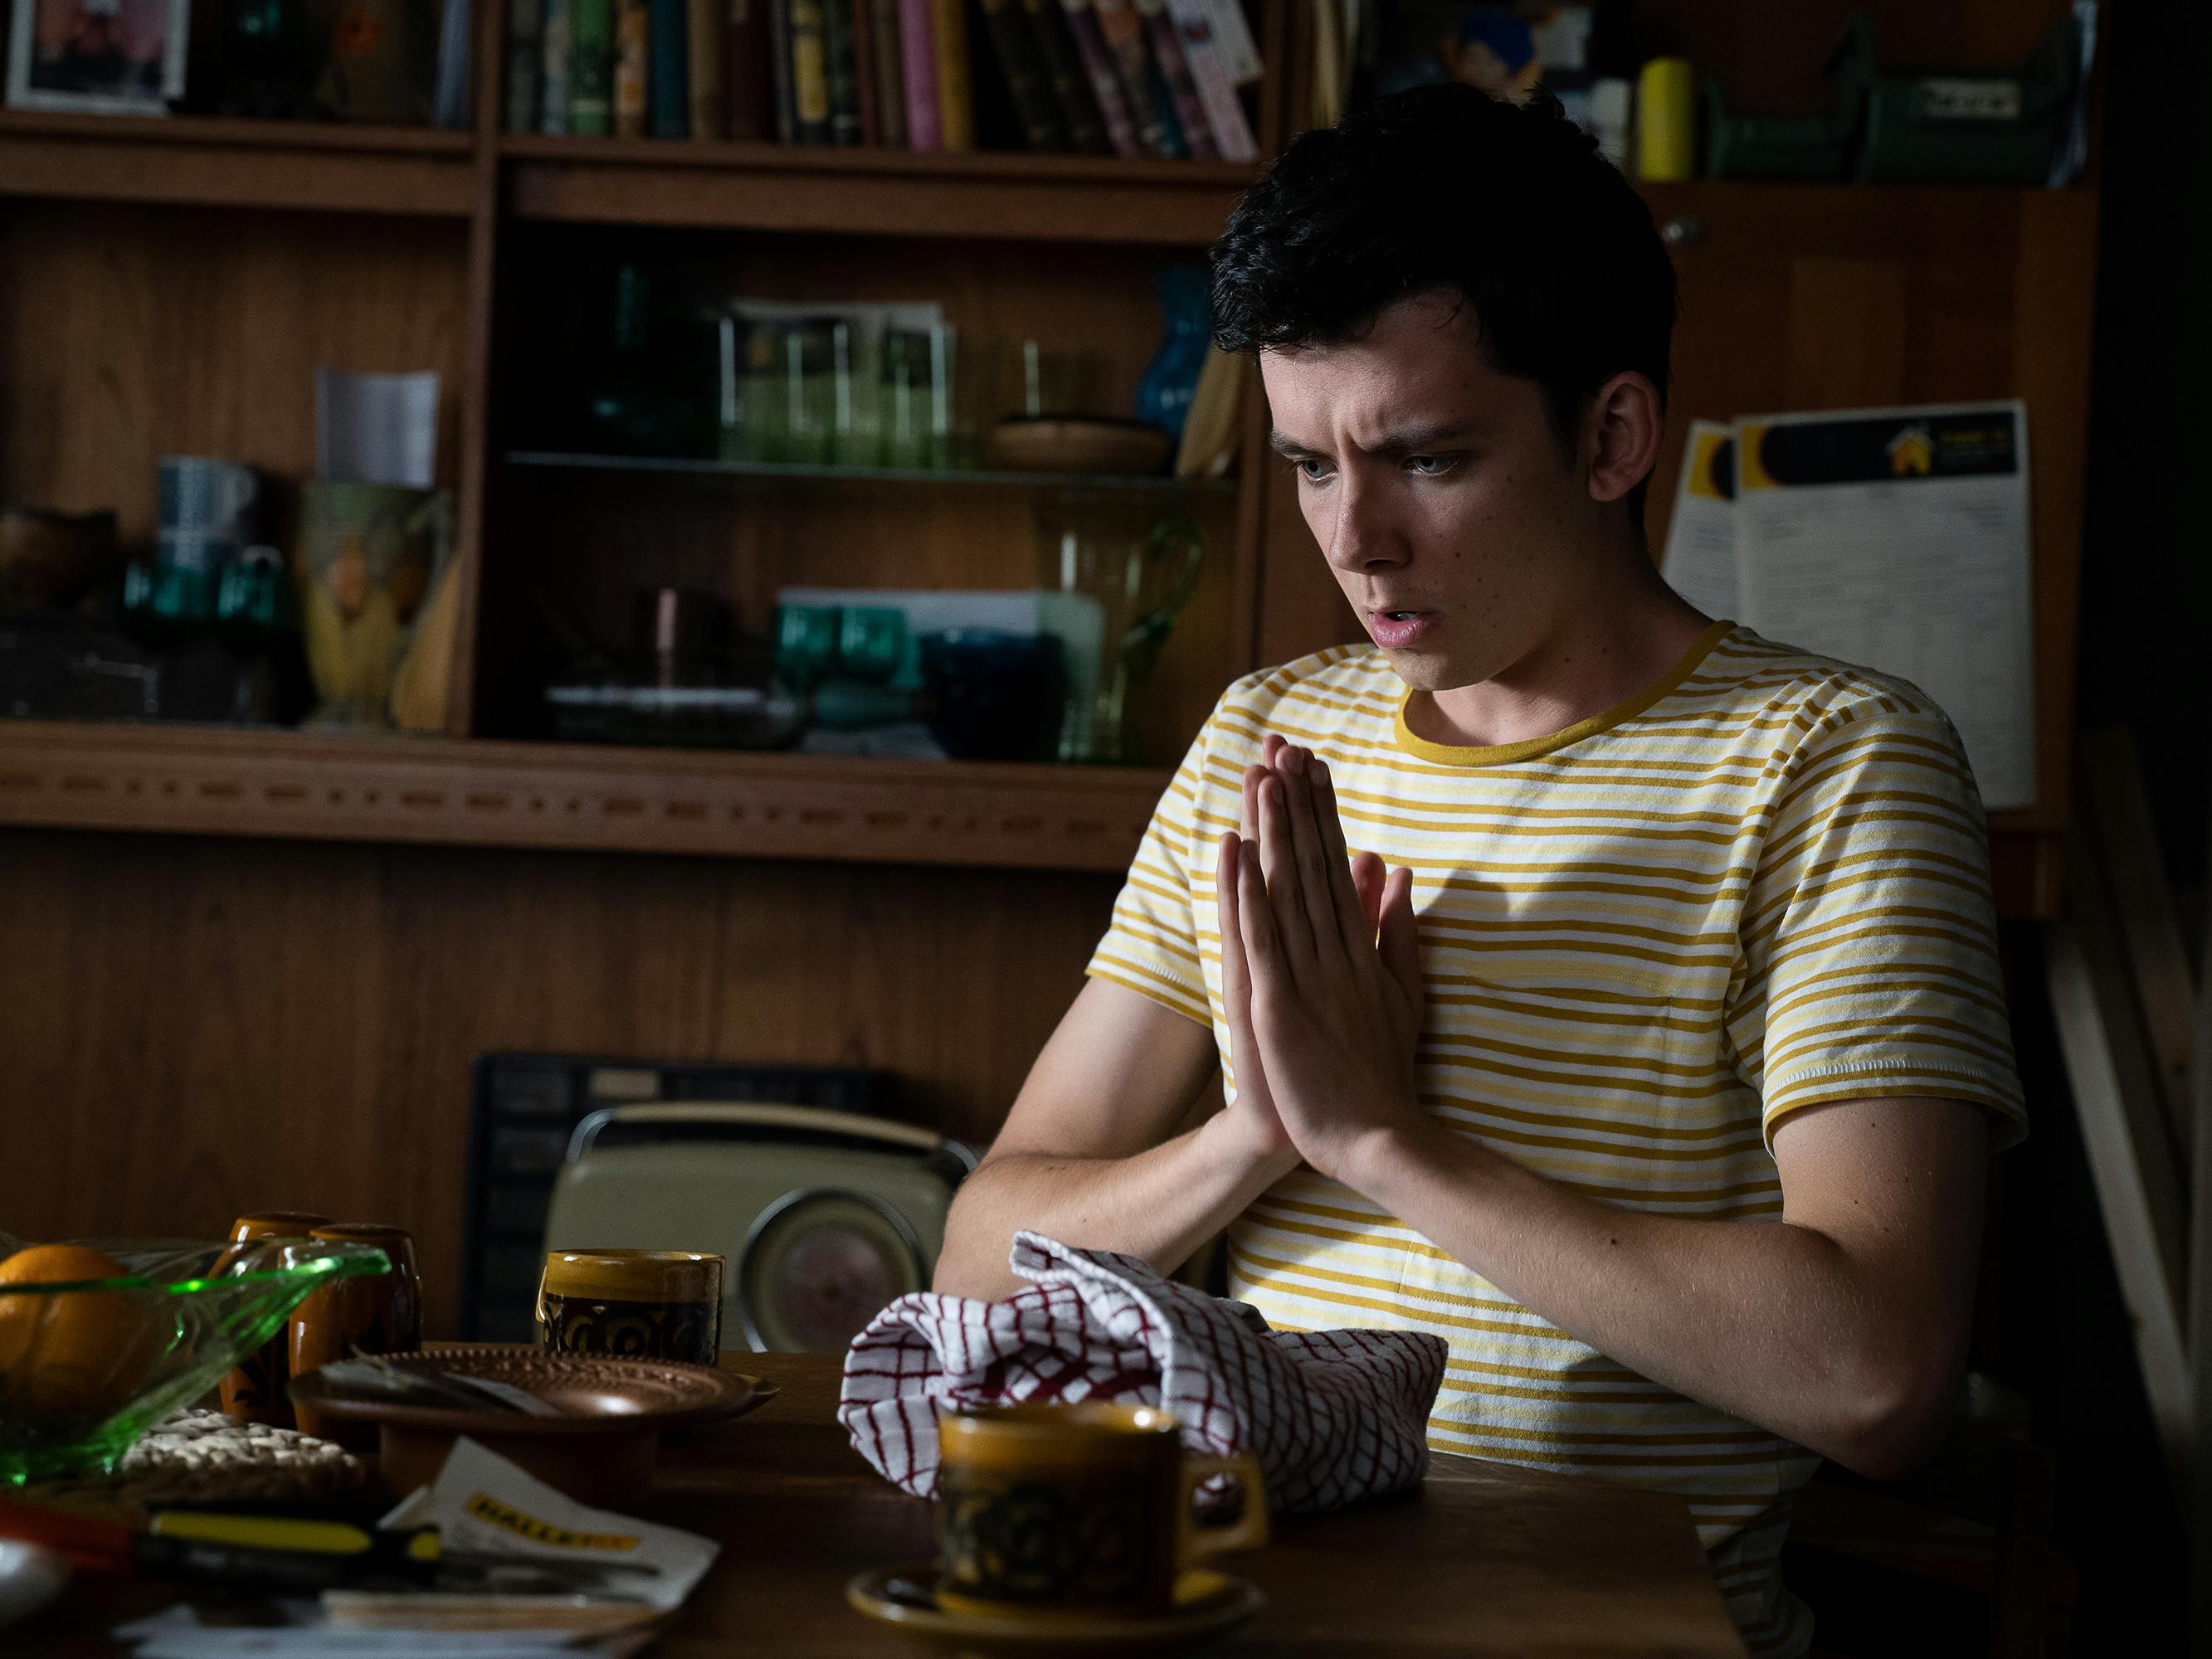 Otis Milburn (Asa Butterfield) wears a striped yellow shirt and looks like he is praying at a kitchen table in his eccentric home.